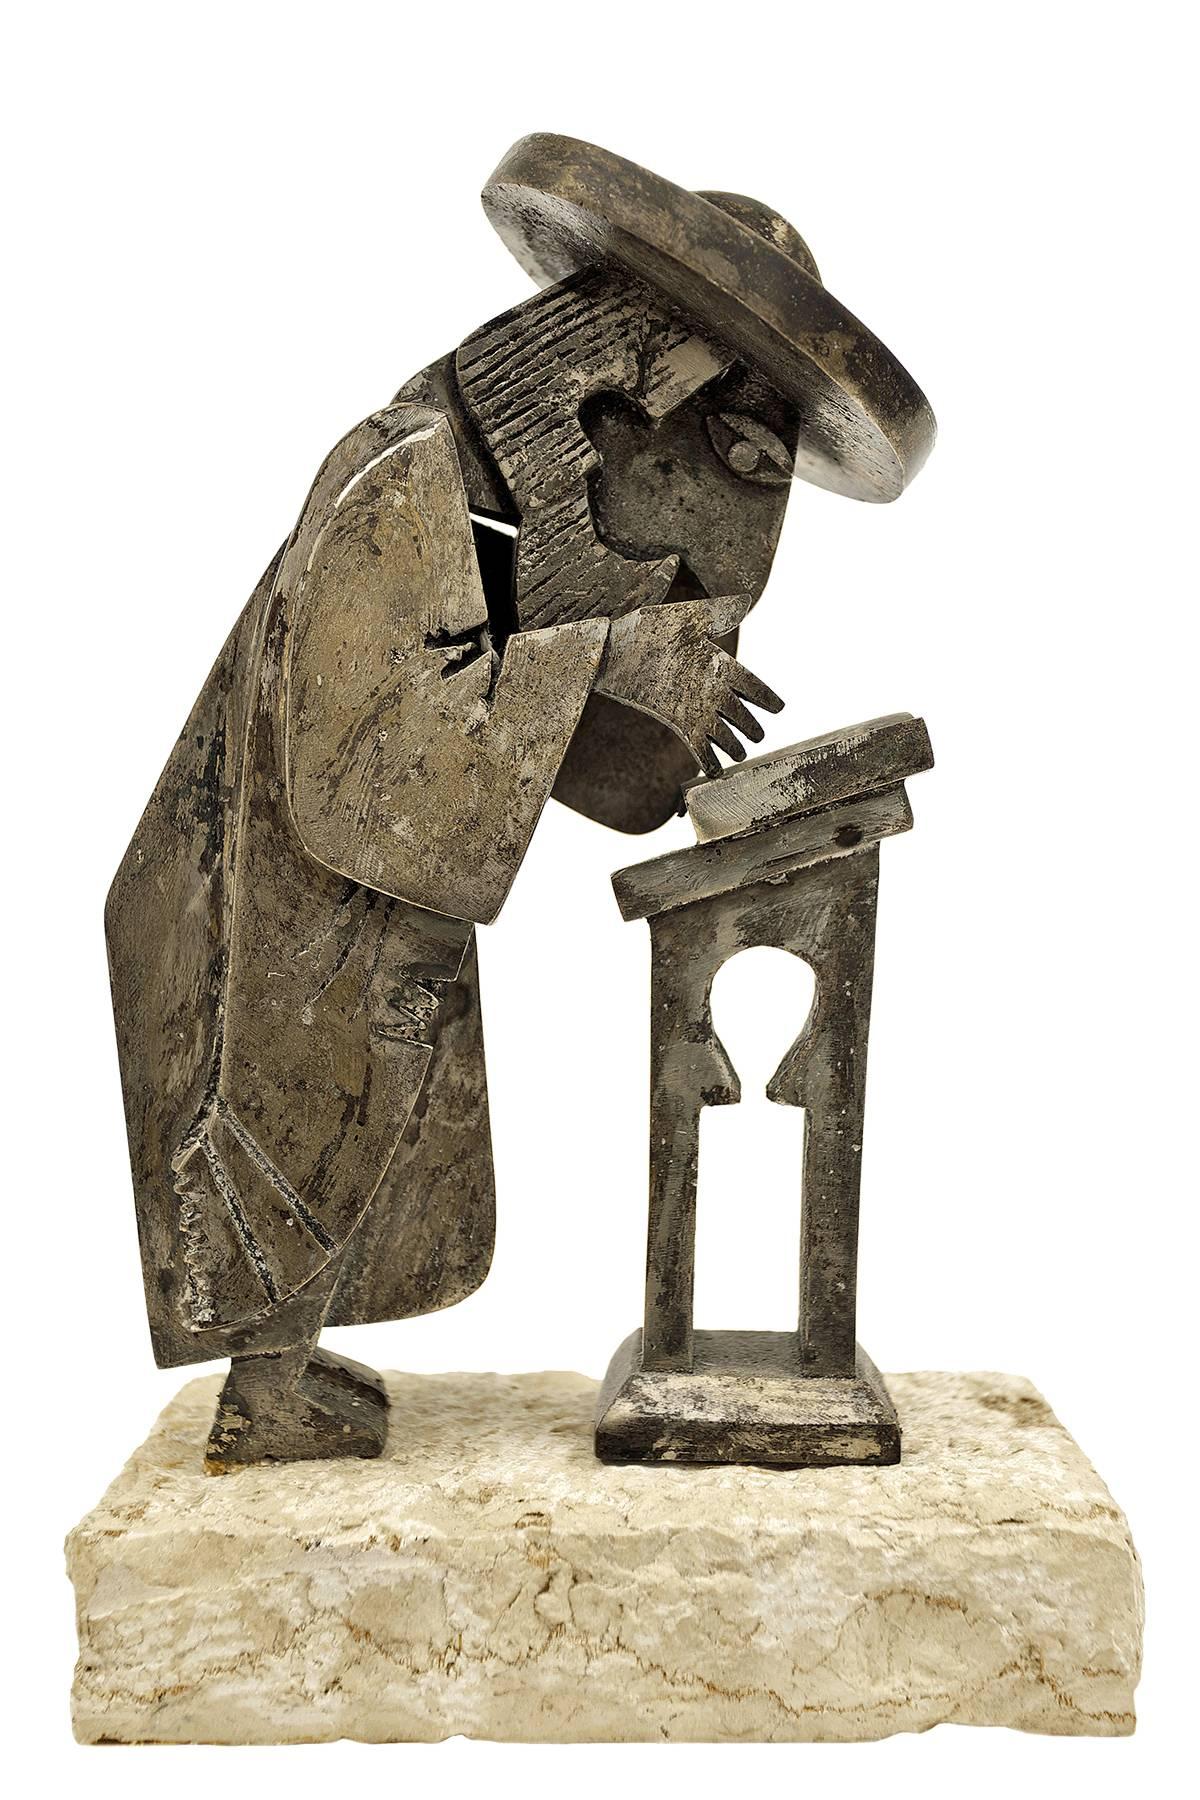 Rare Vintage unusual piece.
In this bronze sculpture by Frank Meisler, the artist recreates a Rabbi at prayer. The figure seems cartoon-like with exaggerated facial features. the head is kinetic and bobs back and forth. you can tilt it back or leave